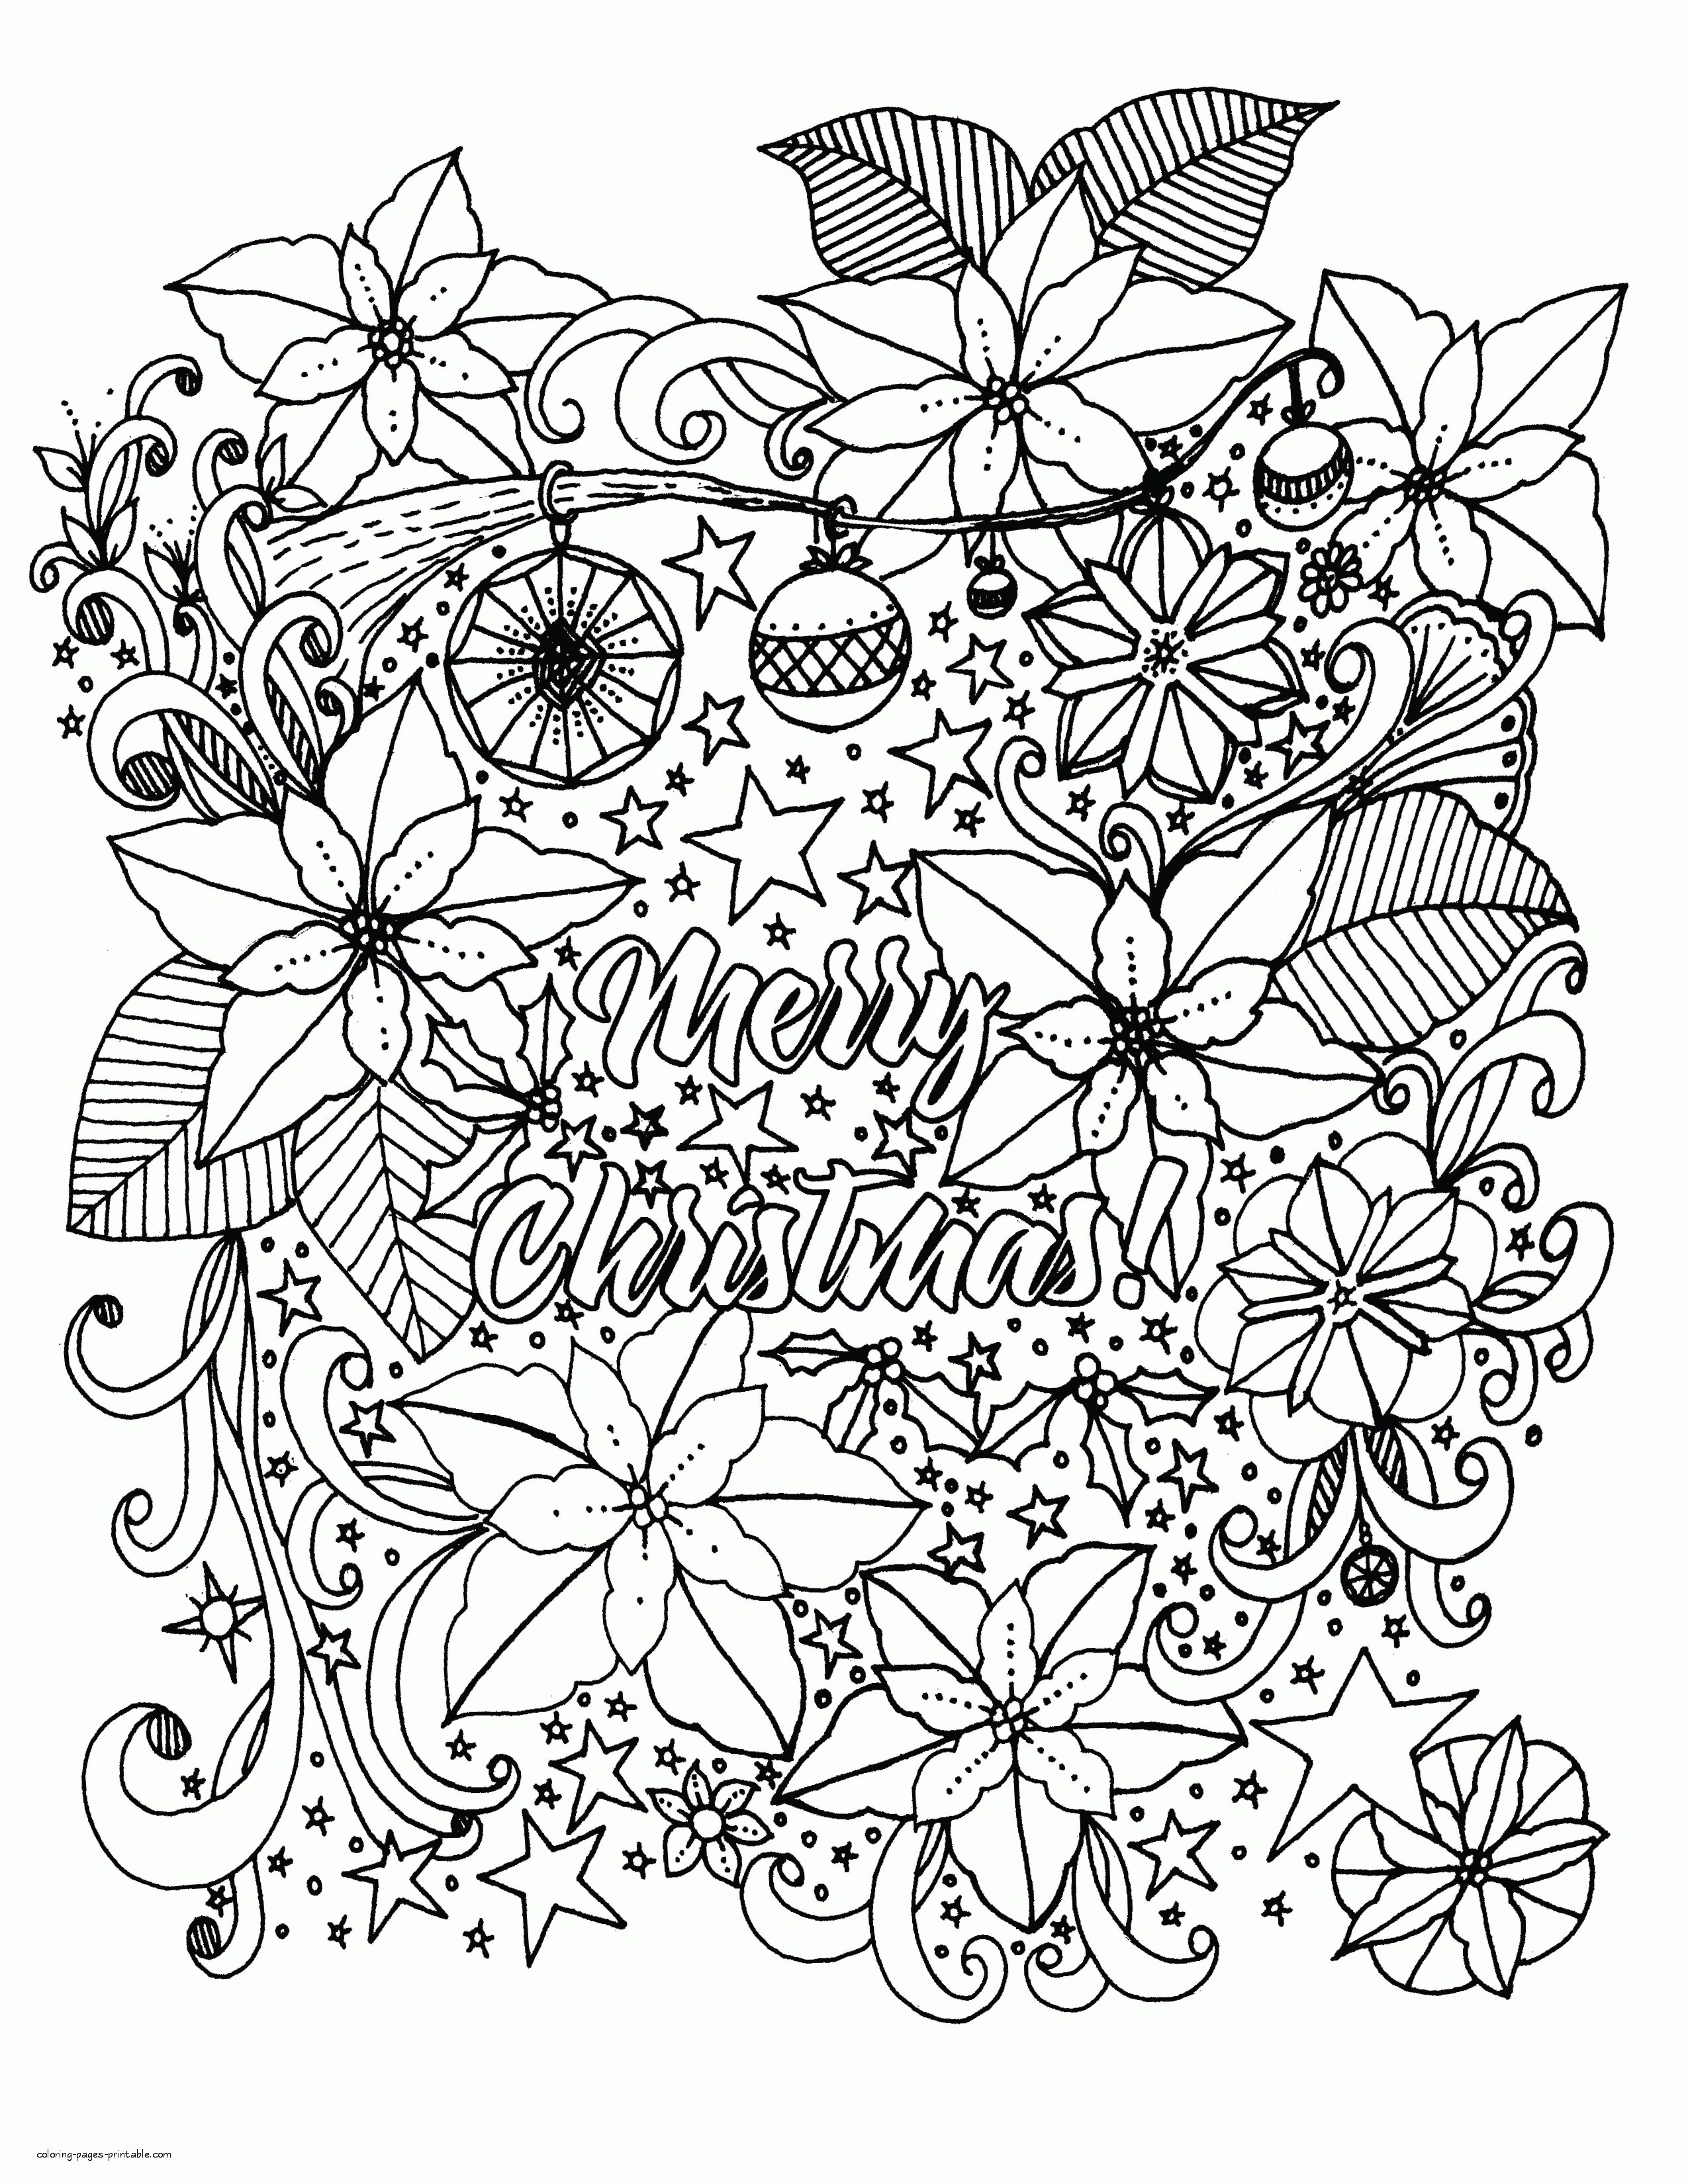 Beautiful Christmas Coloring Pages For Adults For Free COLORING 